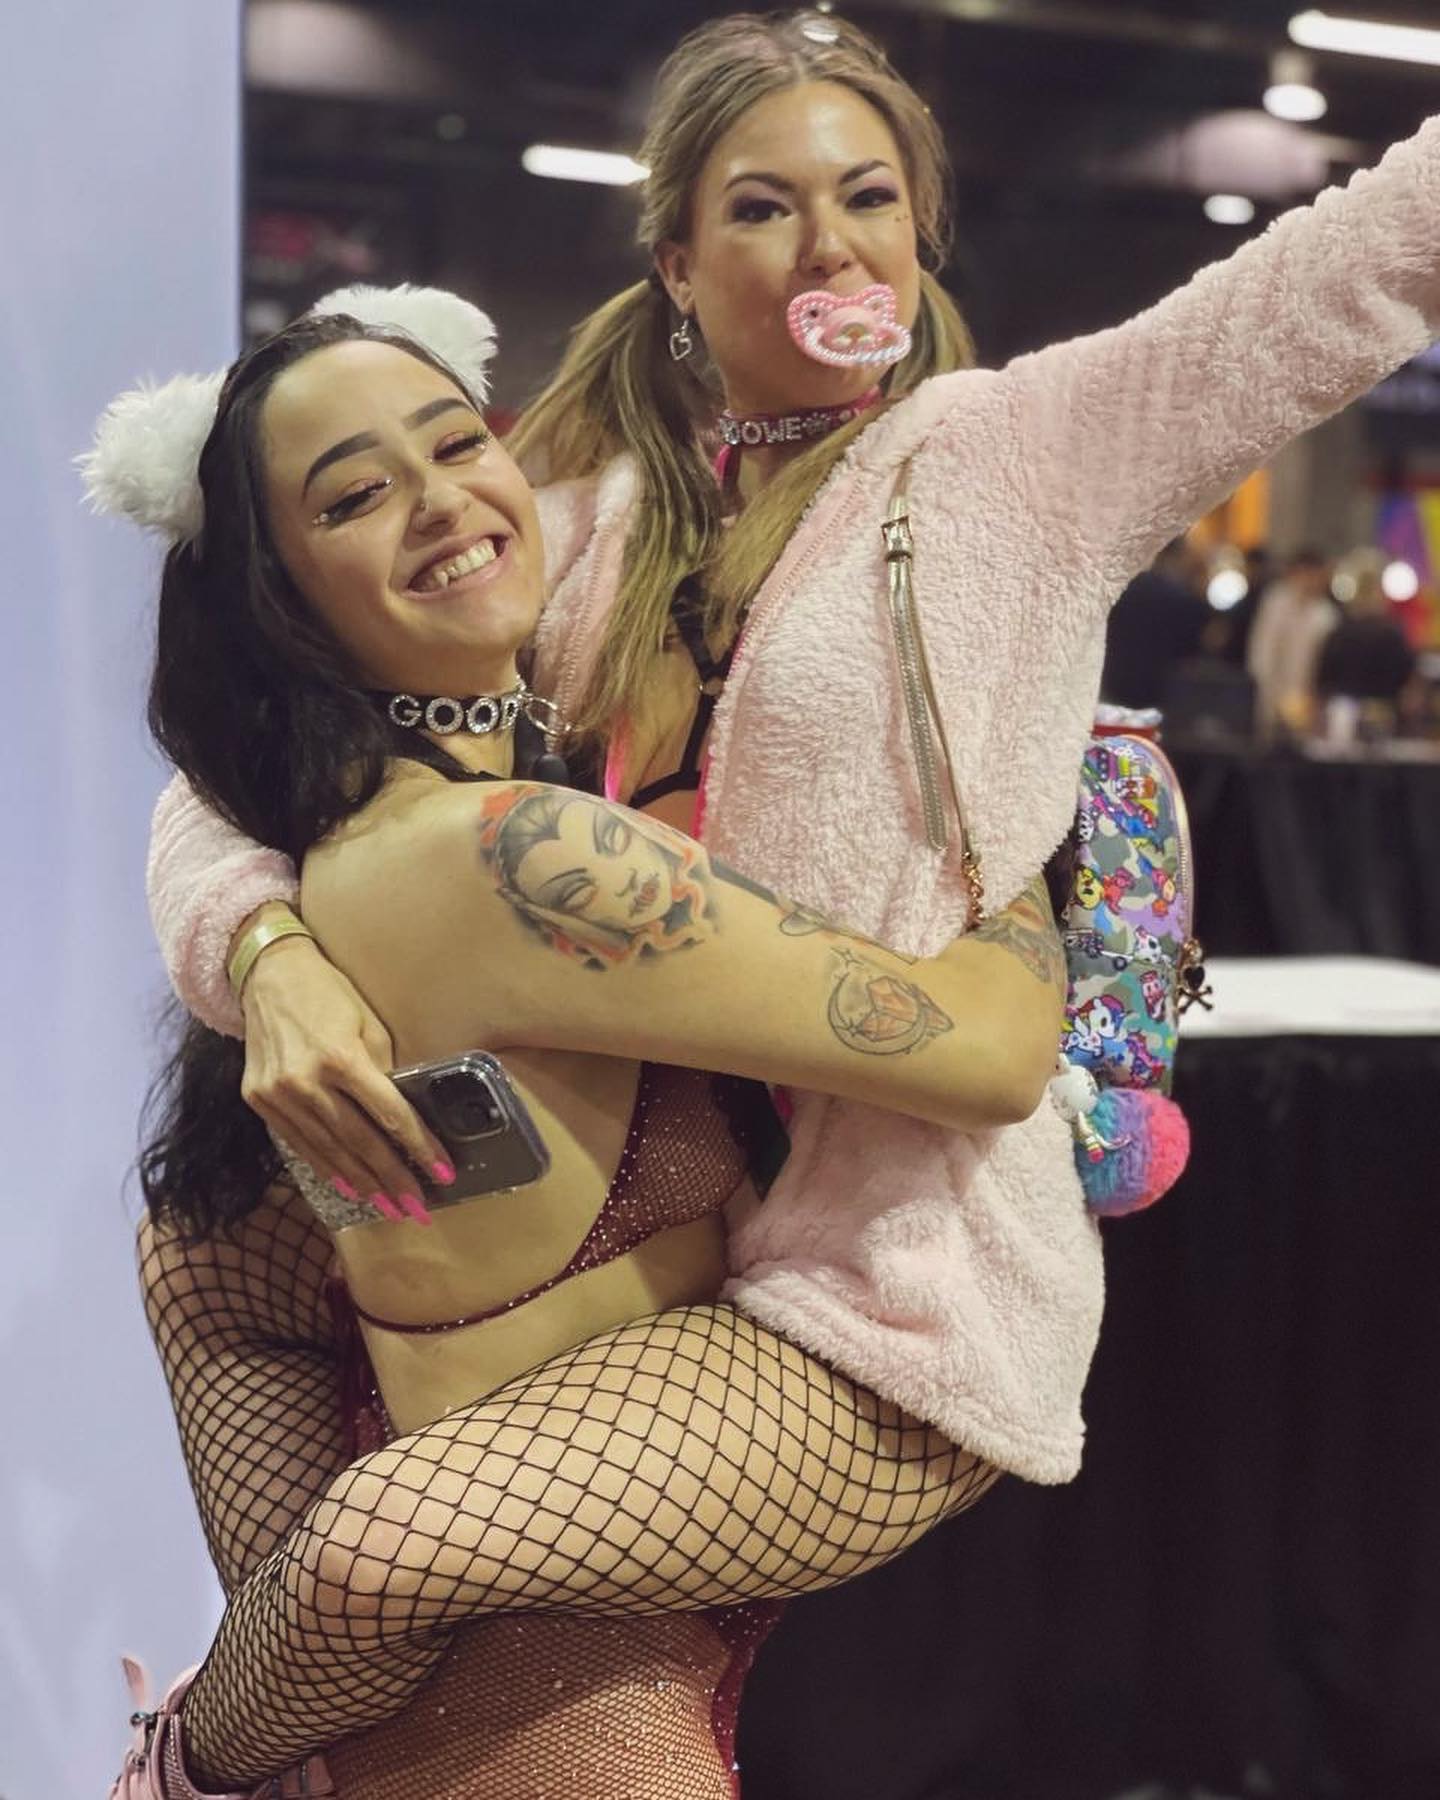 words can’t even begin to describe how amazing EXXXOTICA chicago was ^-^ i love being surrounded by people that are so open & wonderful. friends, new & old, i love you all ☺️☁️✨

i just have to say @realsinnsage is my favorite p0rnstar, and meeting her was literally surreal 🥺